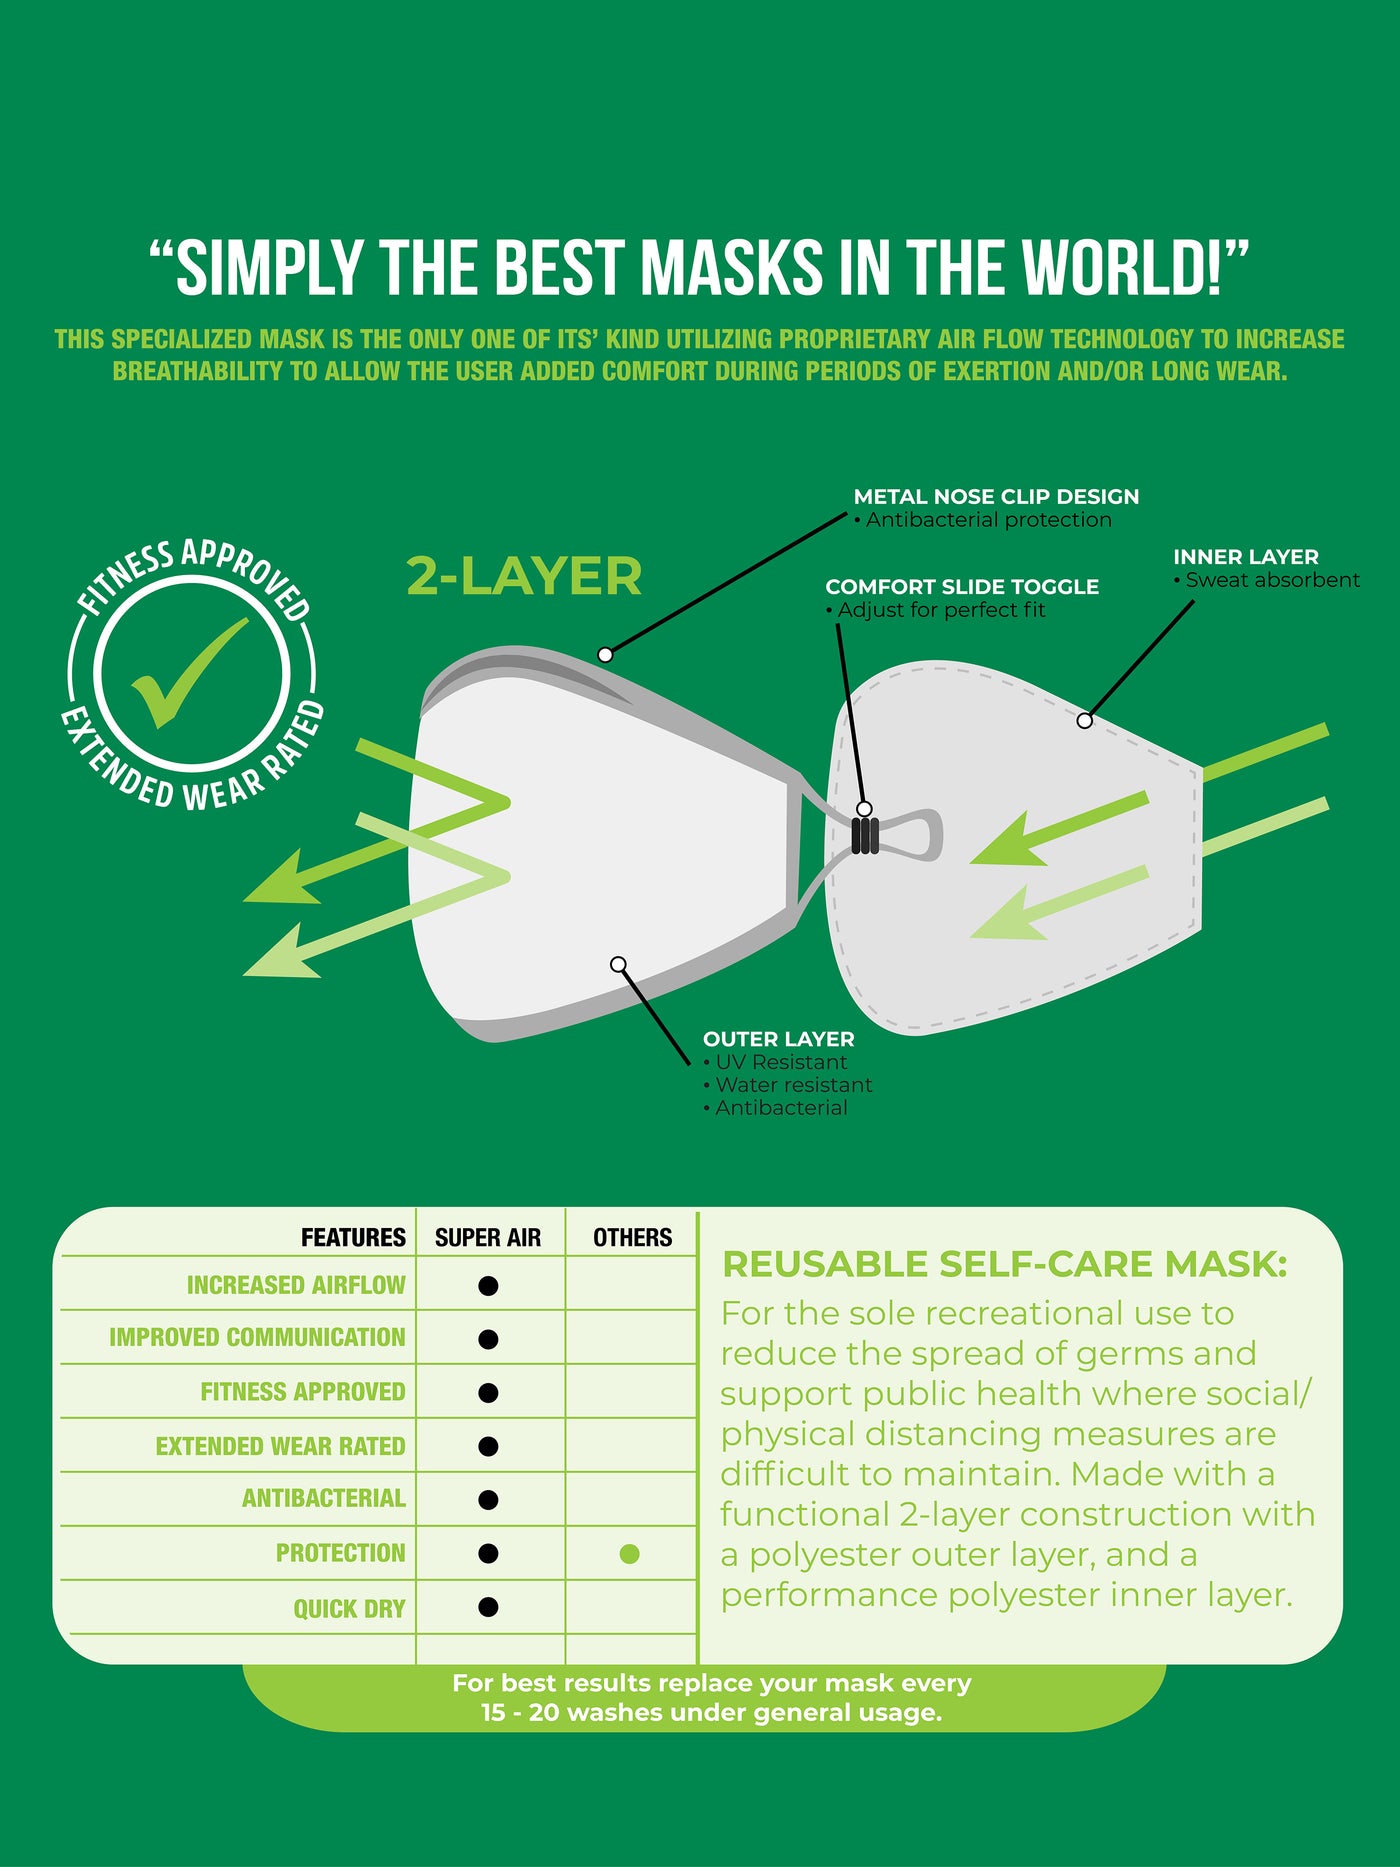 Re-usable 2-Layer Face Mask - Information